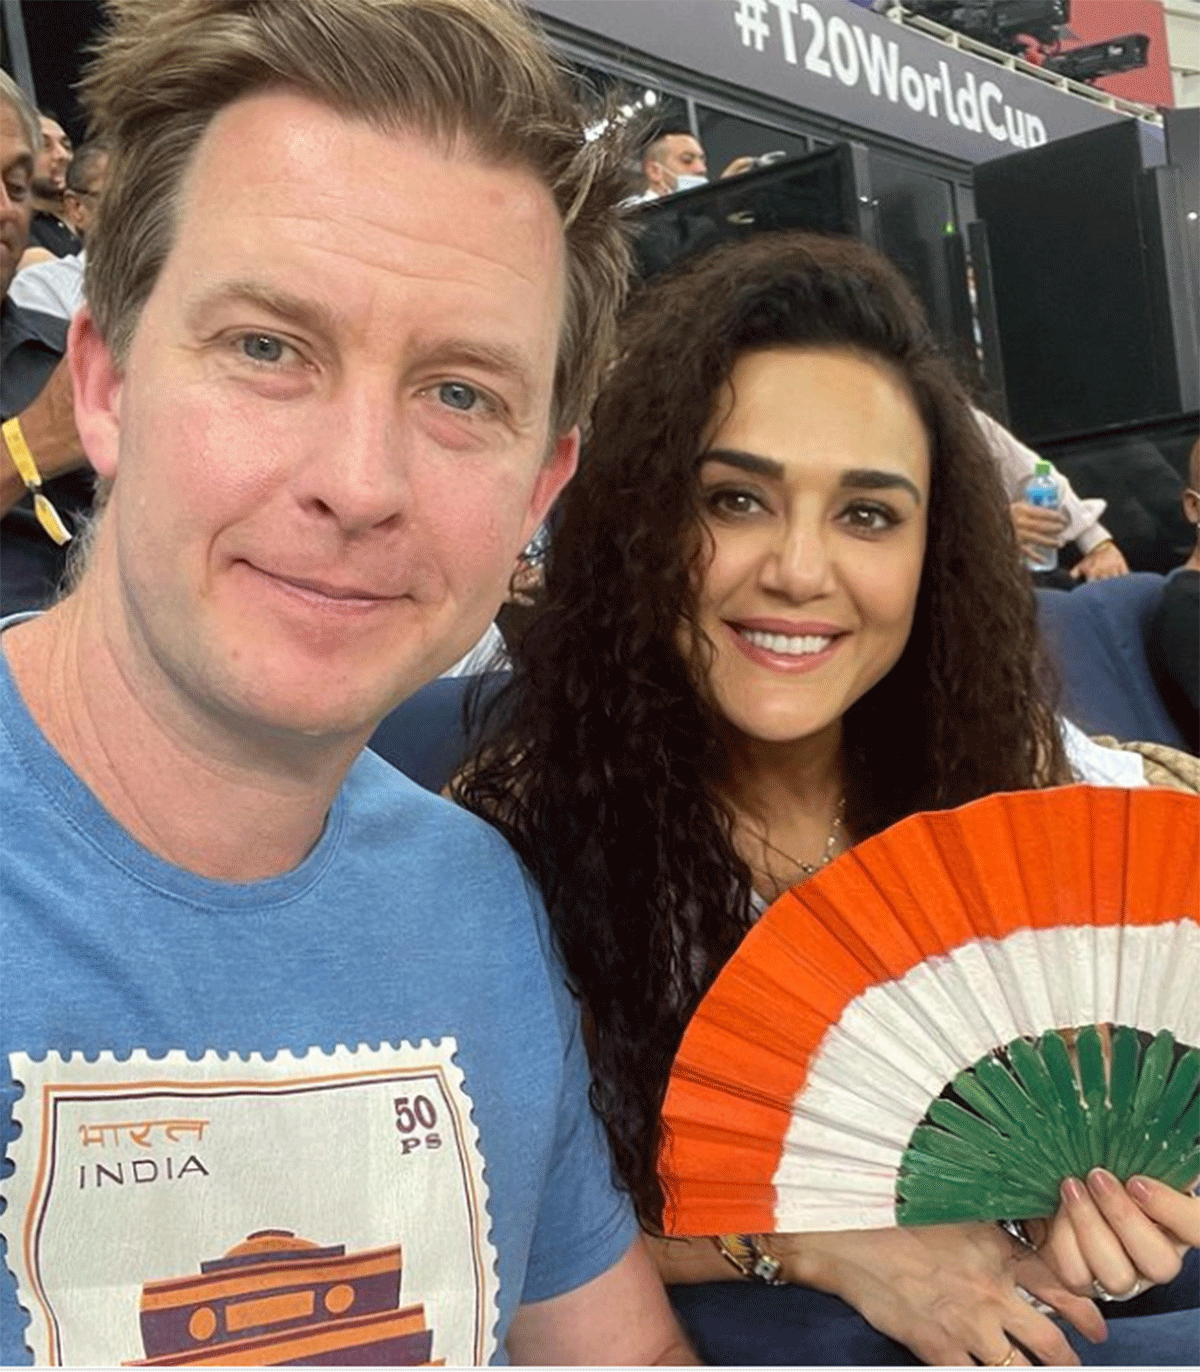 Preity Zinta and her husband Gene Goodenough were in the stands cheering Kohli and his boys